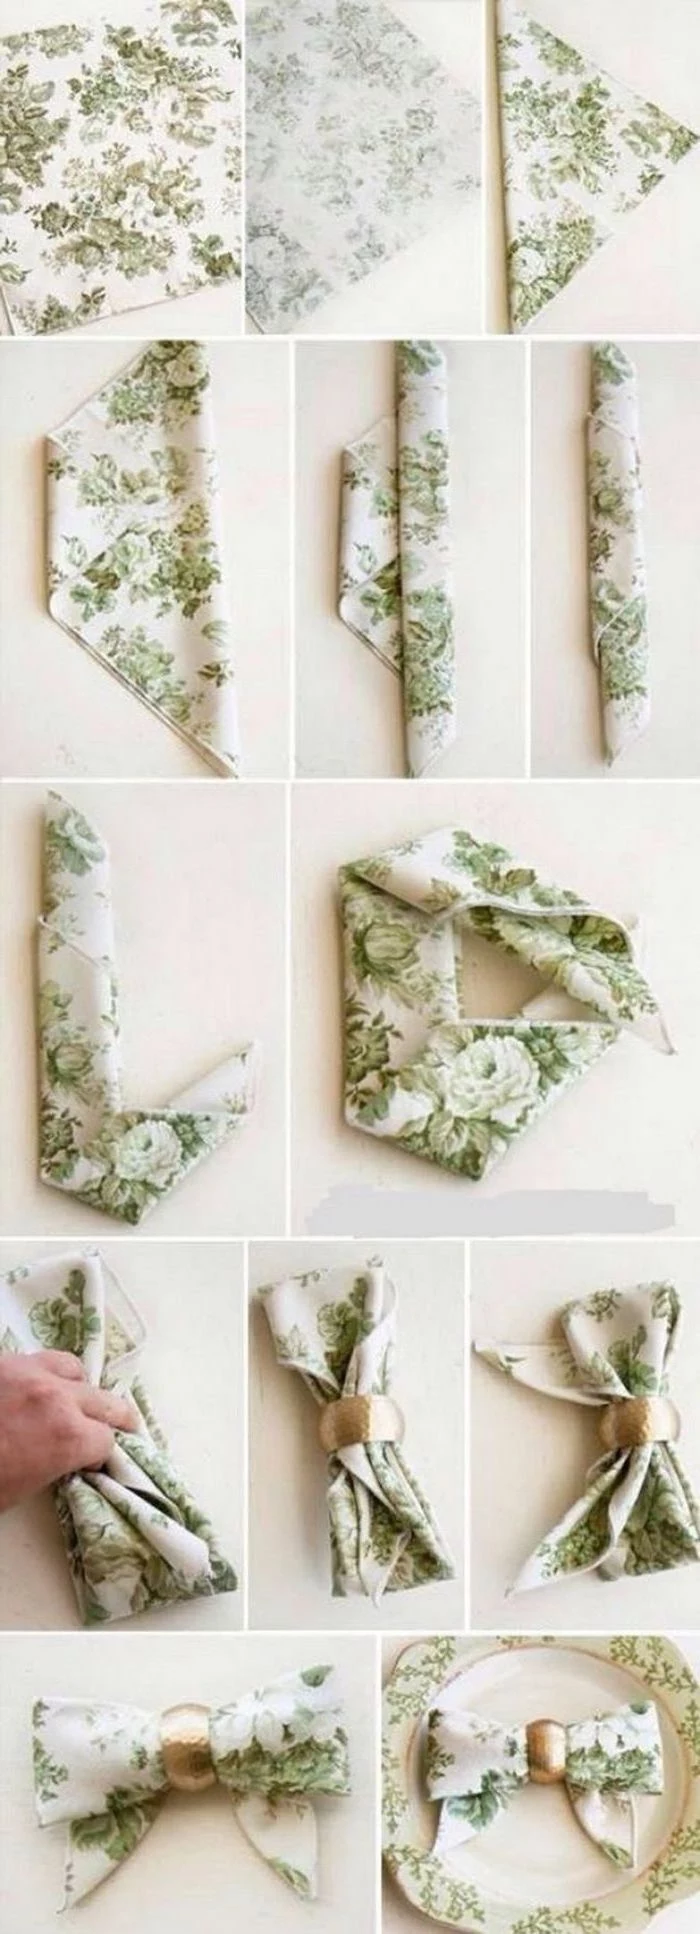 paper napkin folding, green floral napkin, in the shape of a bow, golden ring around it, diy tutorial, step by step